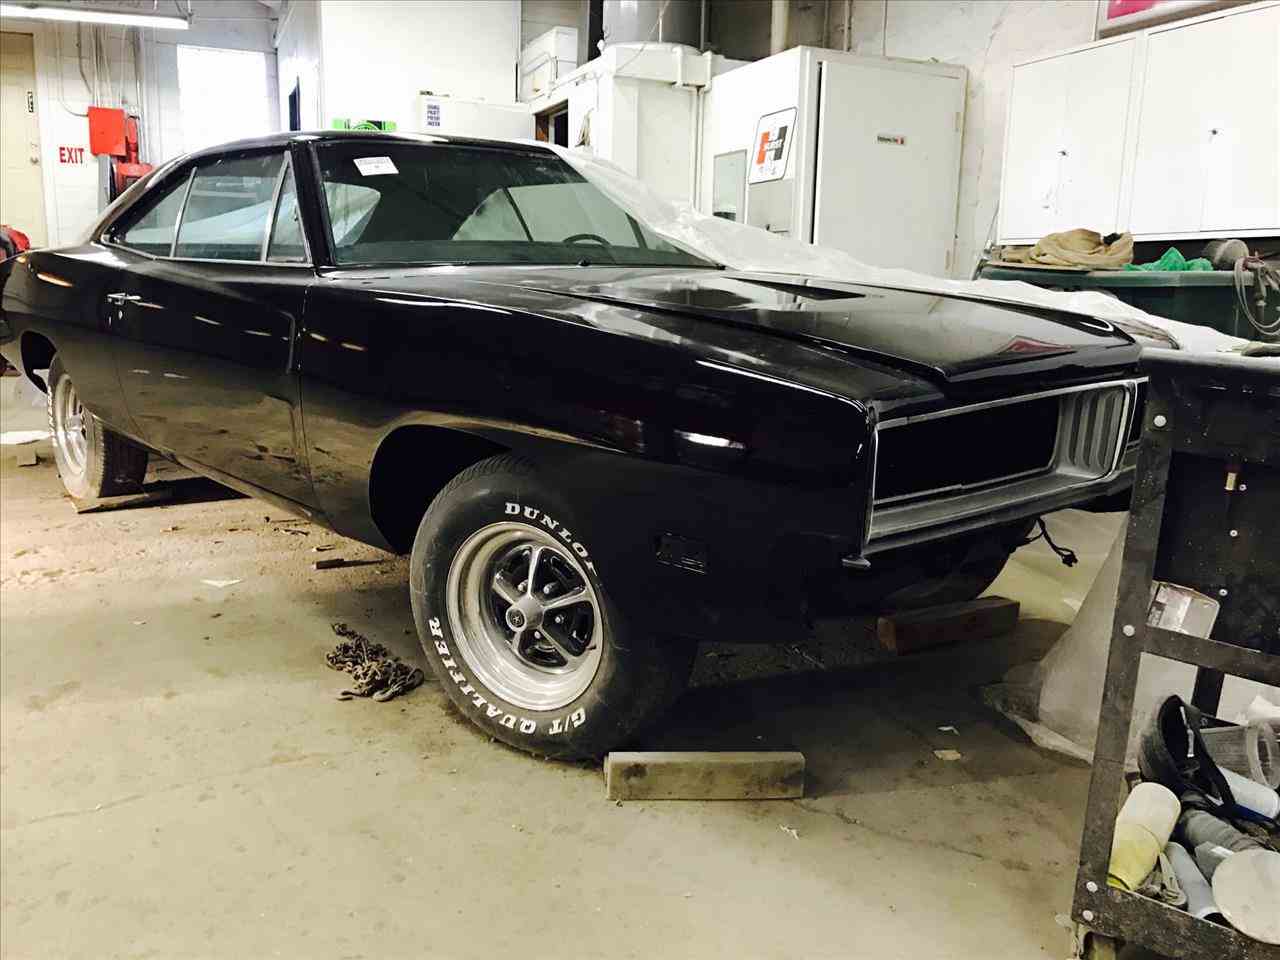 1969 Dodge Charger for Sale | ClassicCars.com | CC-981414